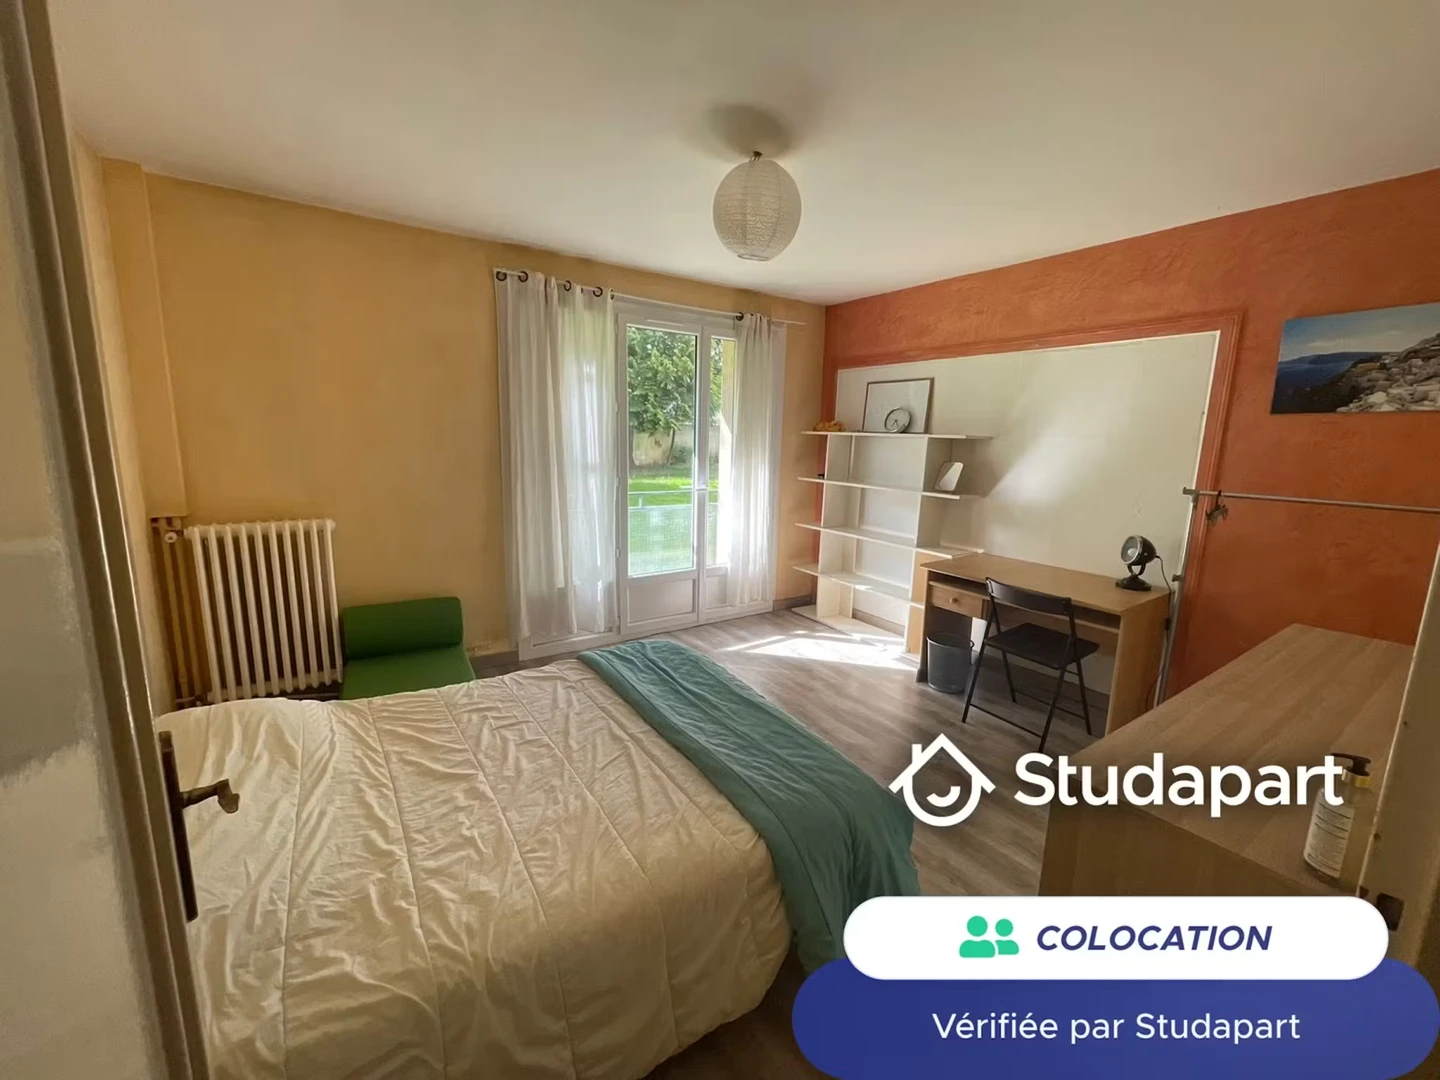 Renting rooms by the month in rennes